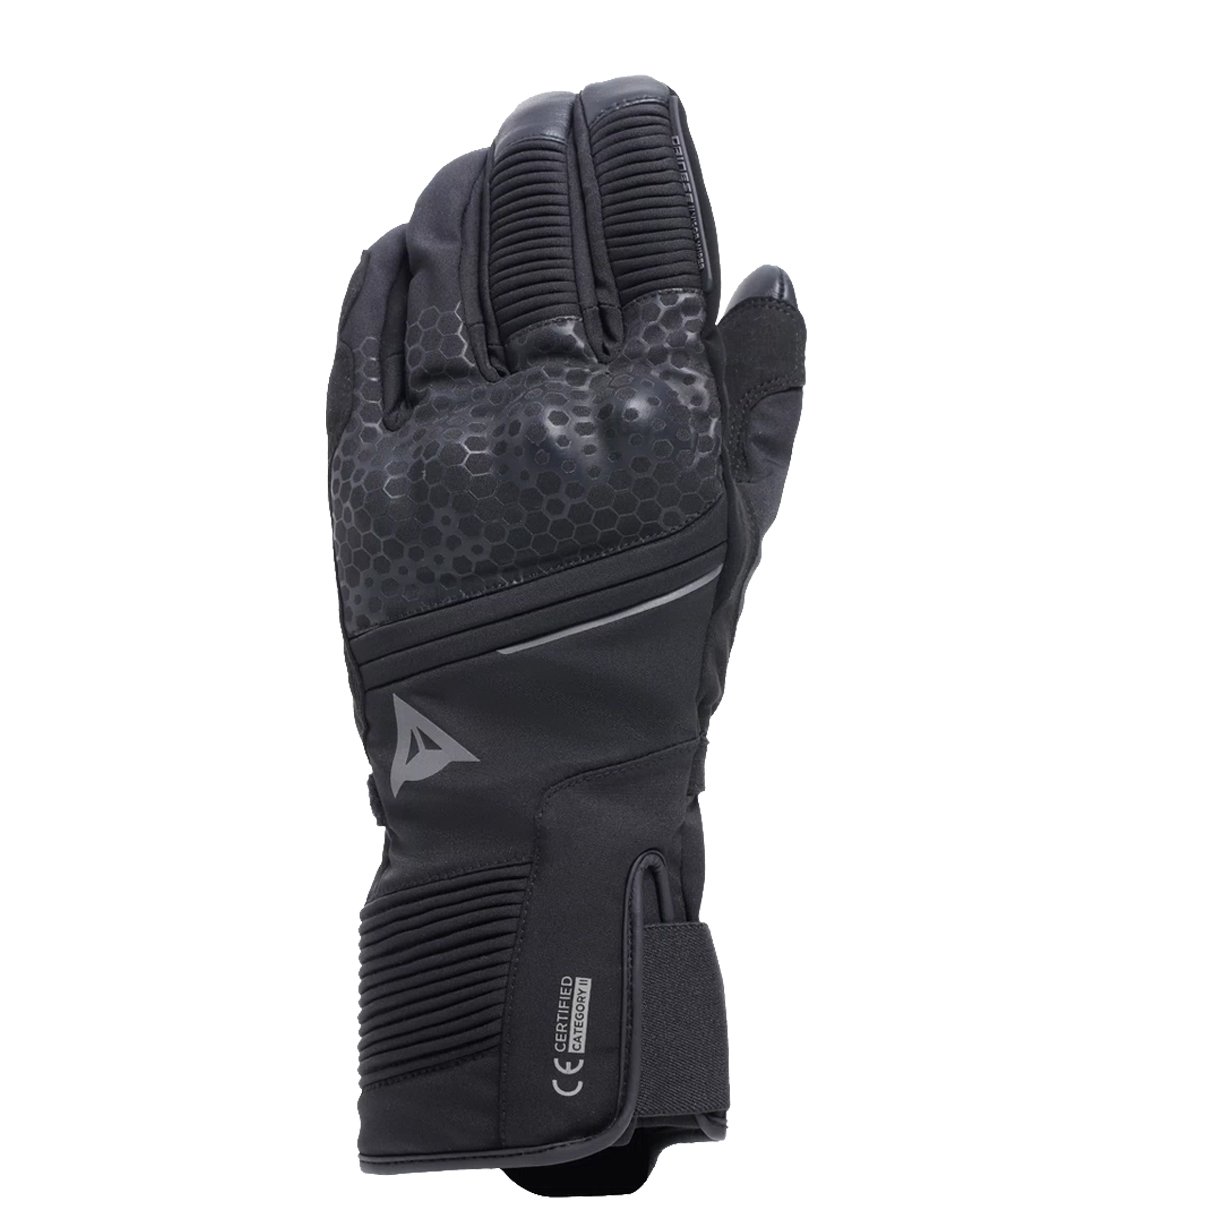 Image of Dainese Tempest 2 D-Dry Long Thermal Gloves Black Size XS ID 8051019679604